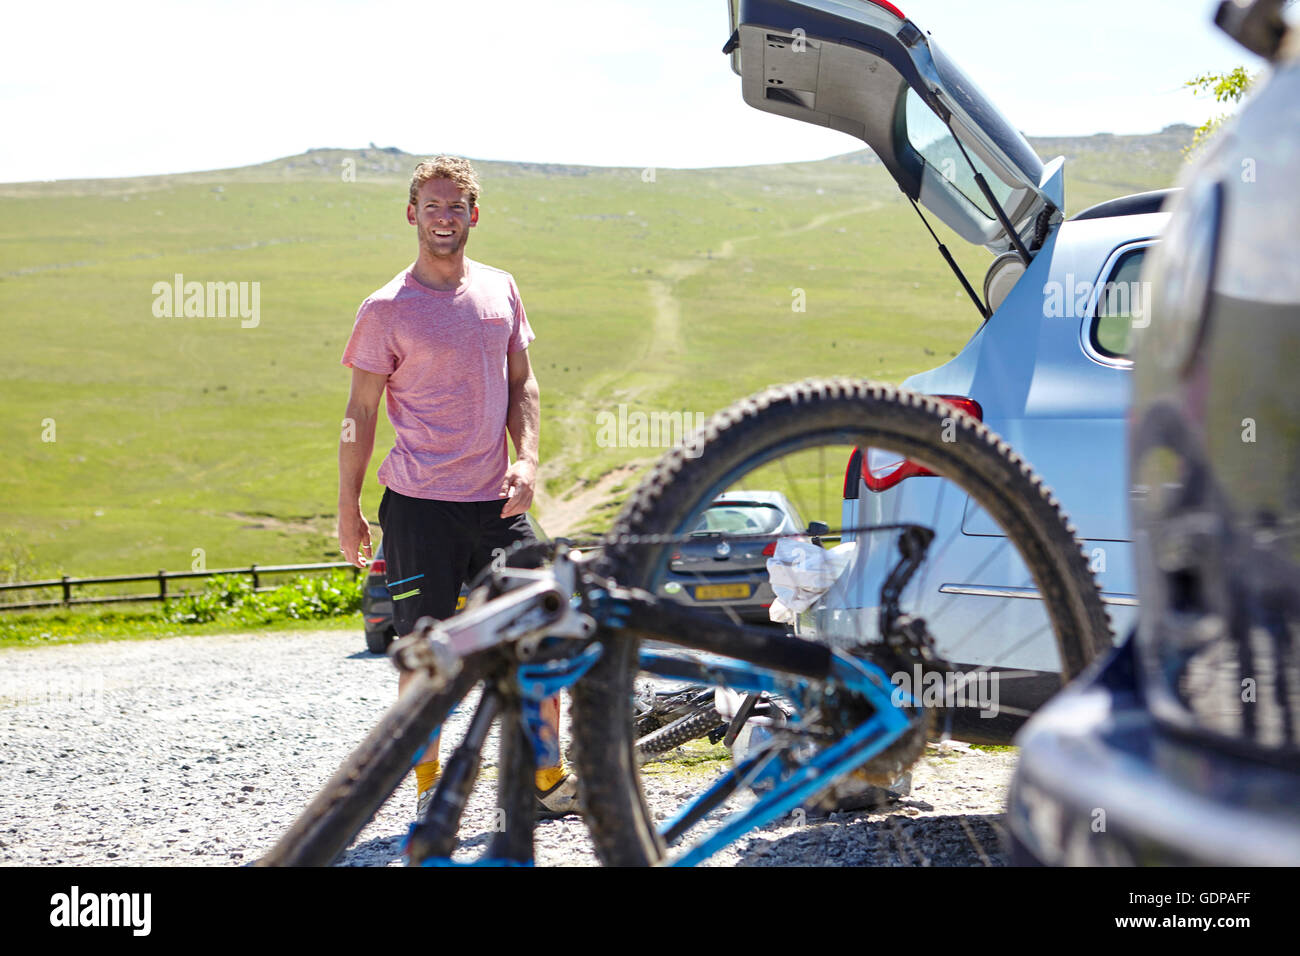 Cyclist with bicycle by car boot looking at camera smiling Stock Photo